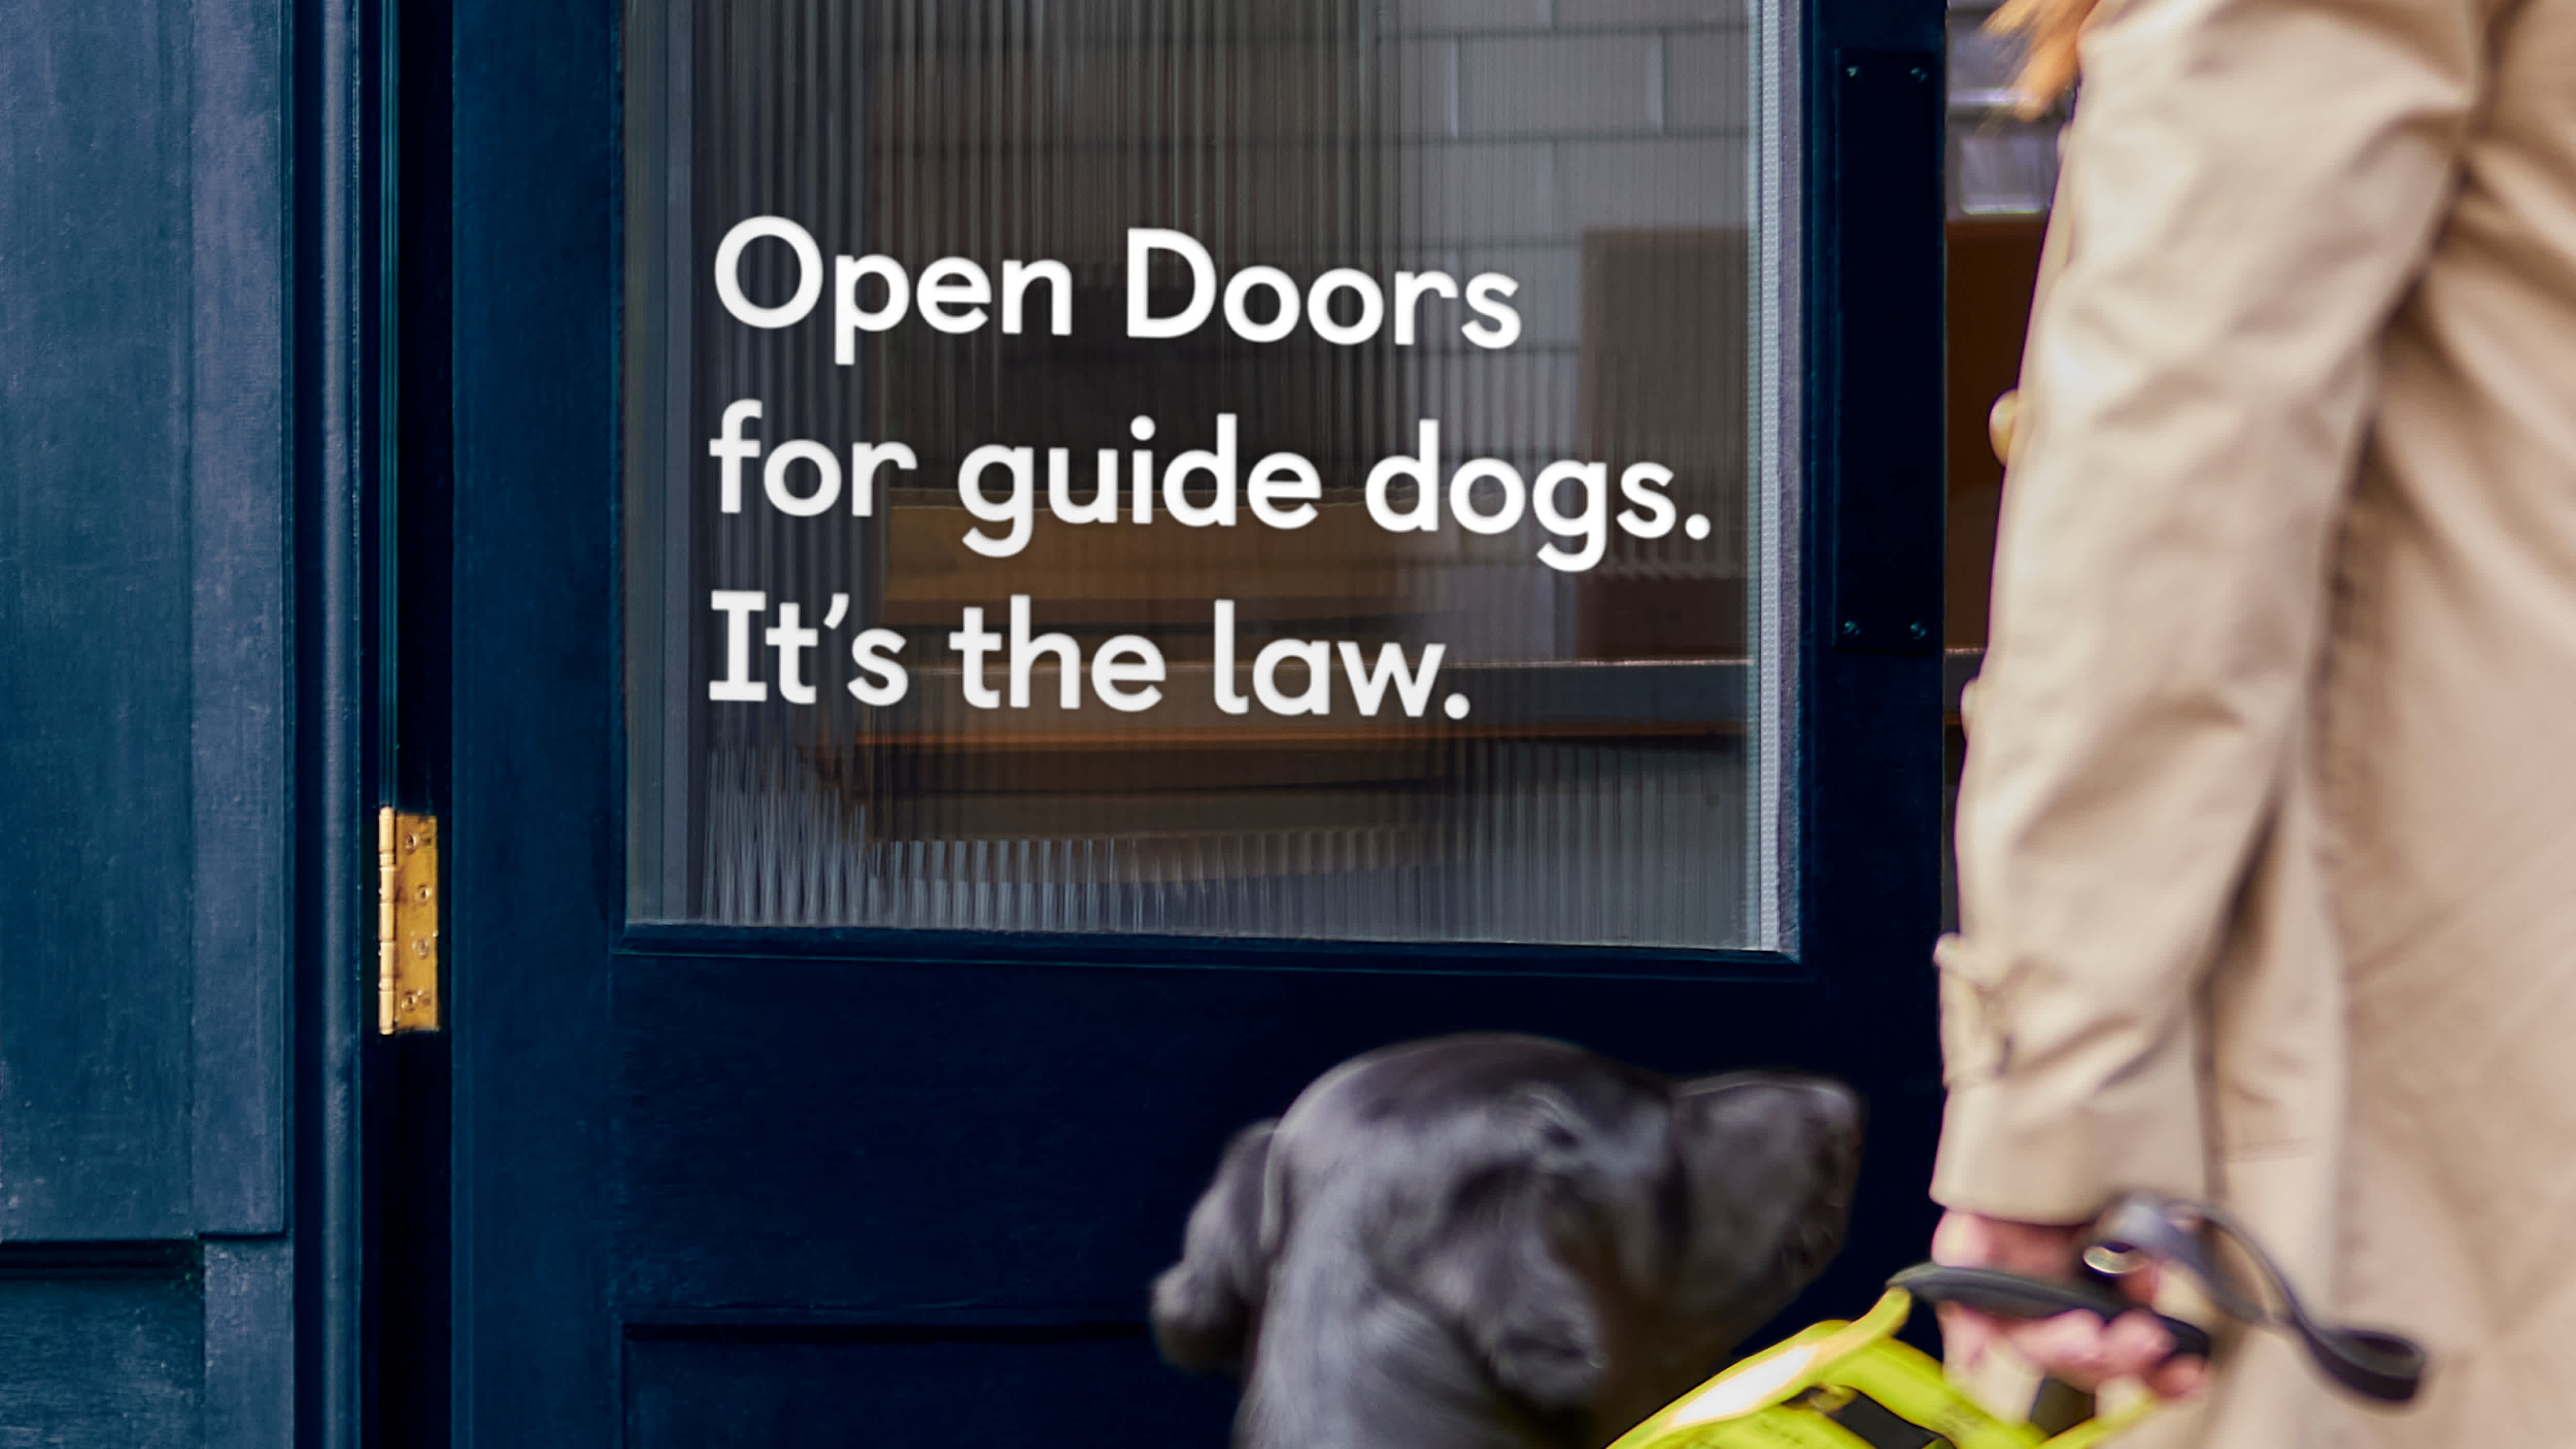 Approved photo for Guide Dogs Open Doors campaign. Open door with "Open Doors for guide dogs. It's the law" imposed on the door glass. 